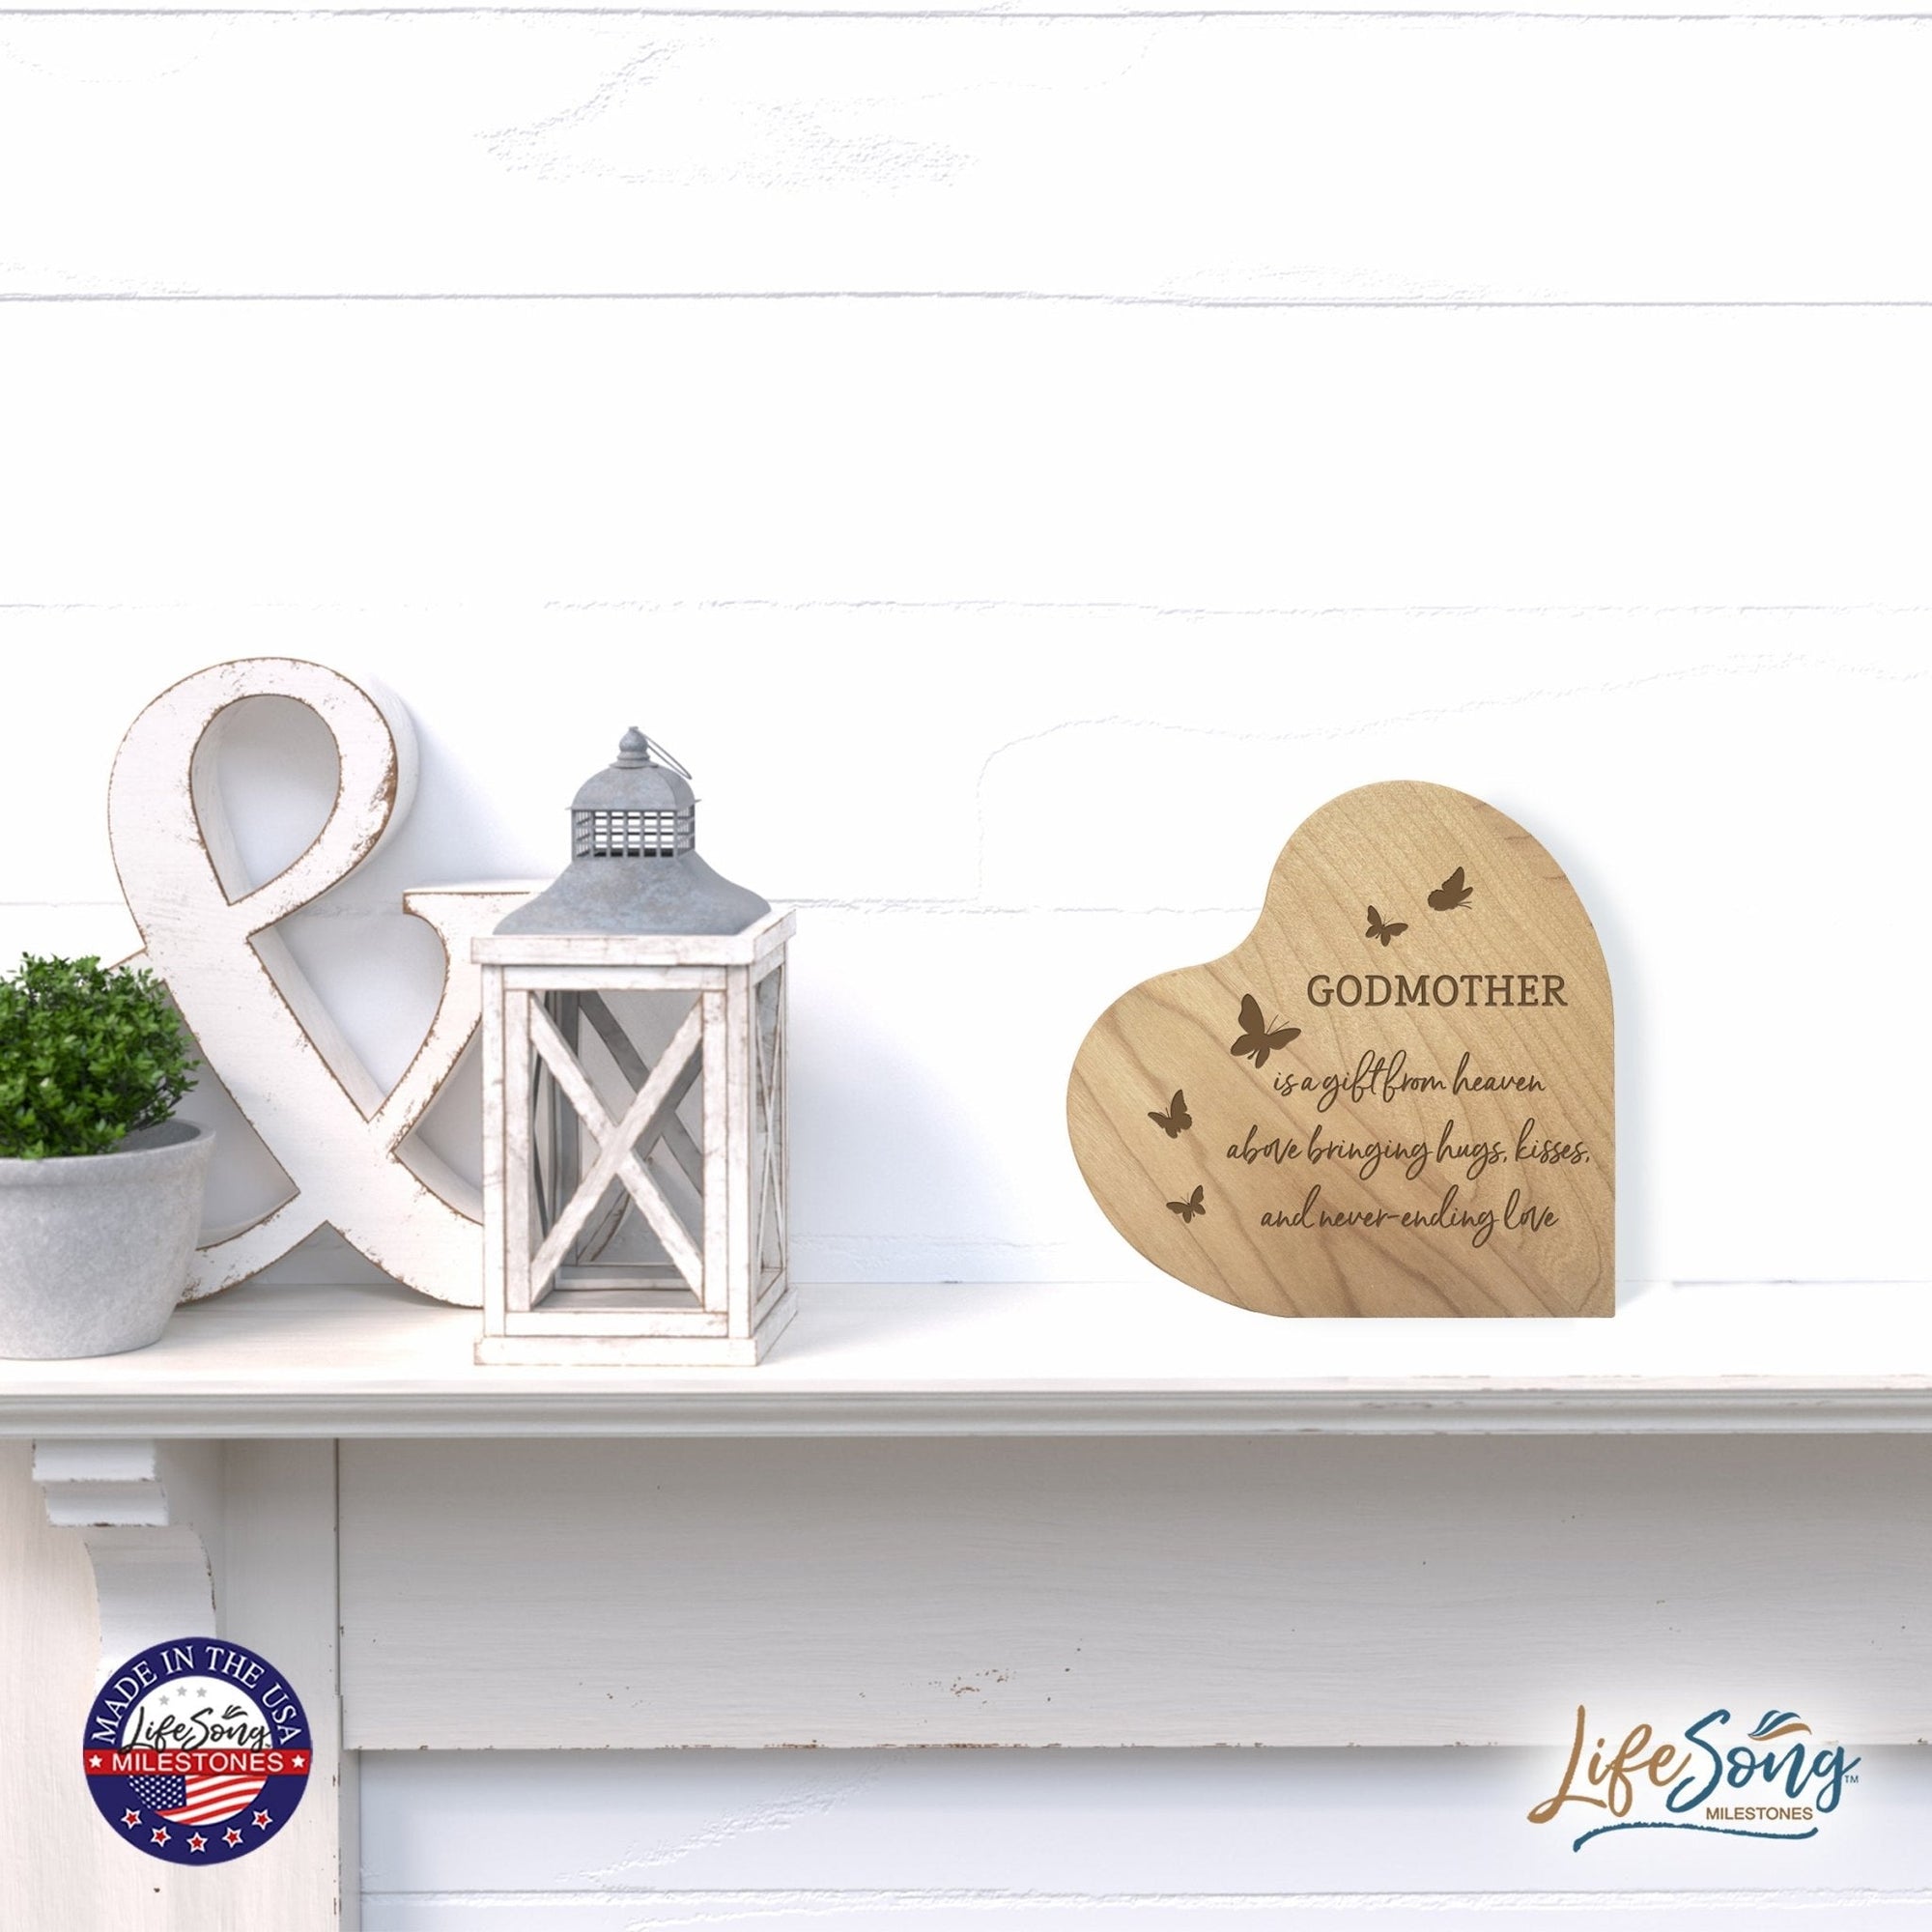 Modern Godmother’s Love Solid Wood Heart Decoration With Inspirational Verse Keepsake Gift 5x5.25 - Godmother Is A Gift = Never-ending Love - LifeSong Milestones